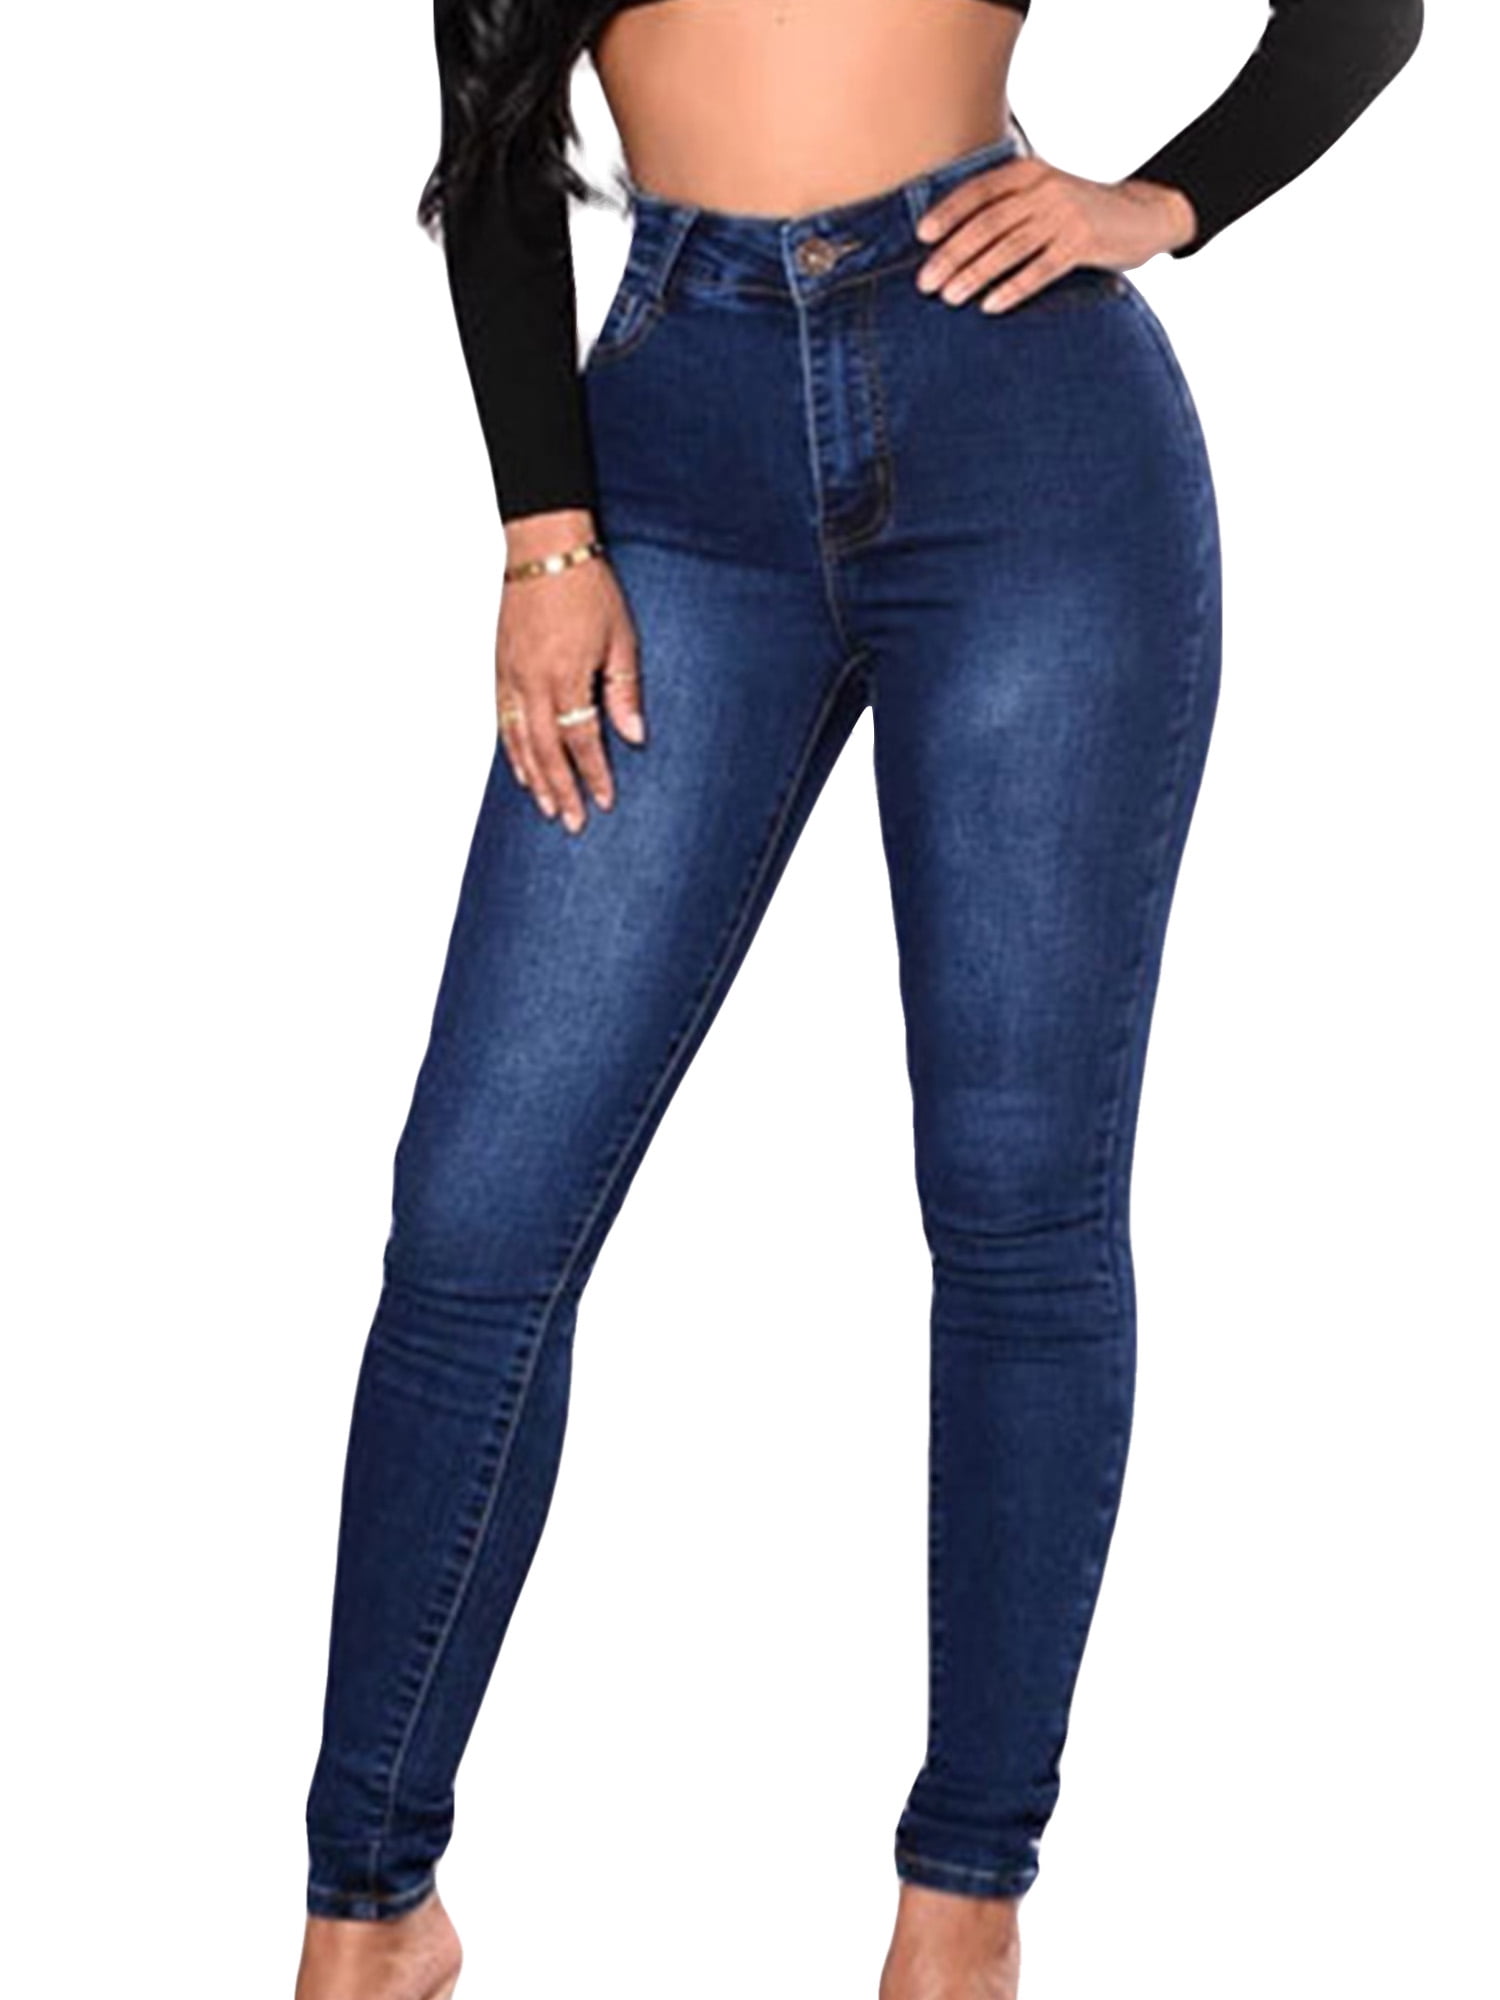 High Waisted Jeans Outfit Dark Blue New Look Stretch Skinny Jeans Womens  Slimming Jeggings Fitness Workout - AliExpress